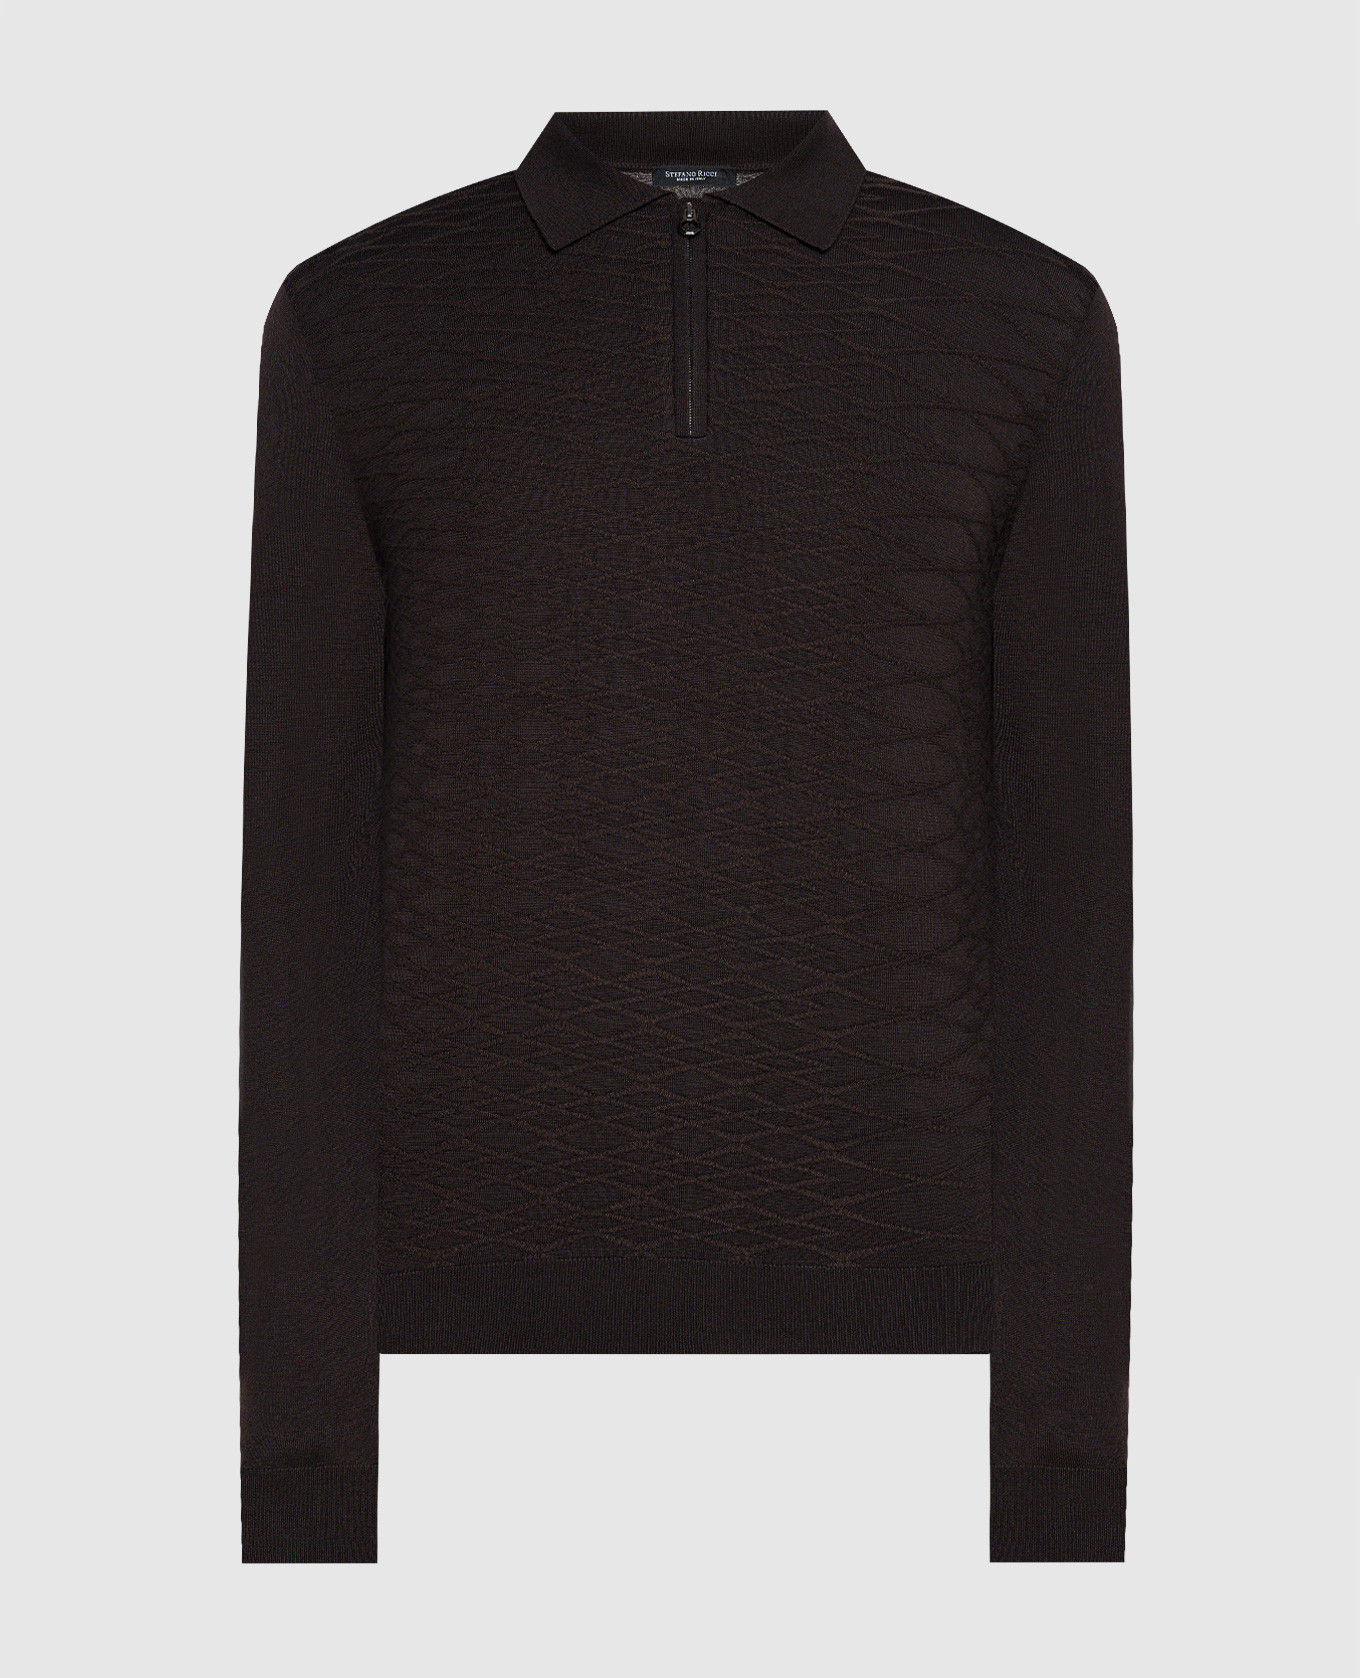 Brown polo shirt in cashmere and silk with a textured pattern and logo